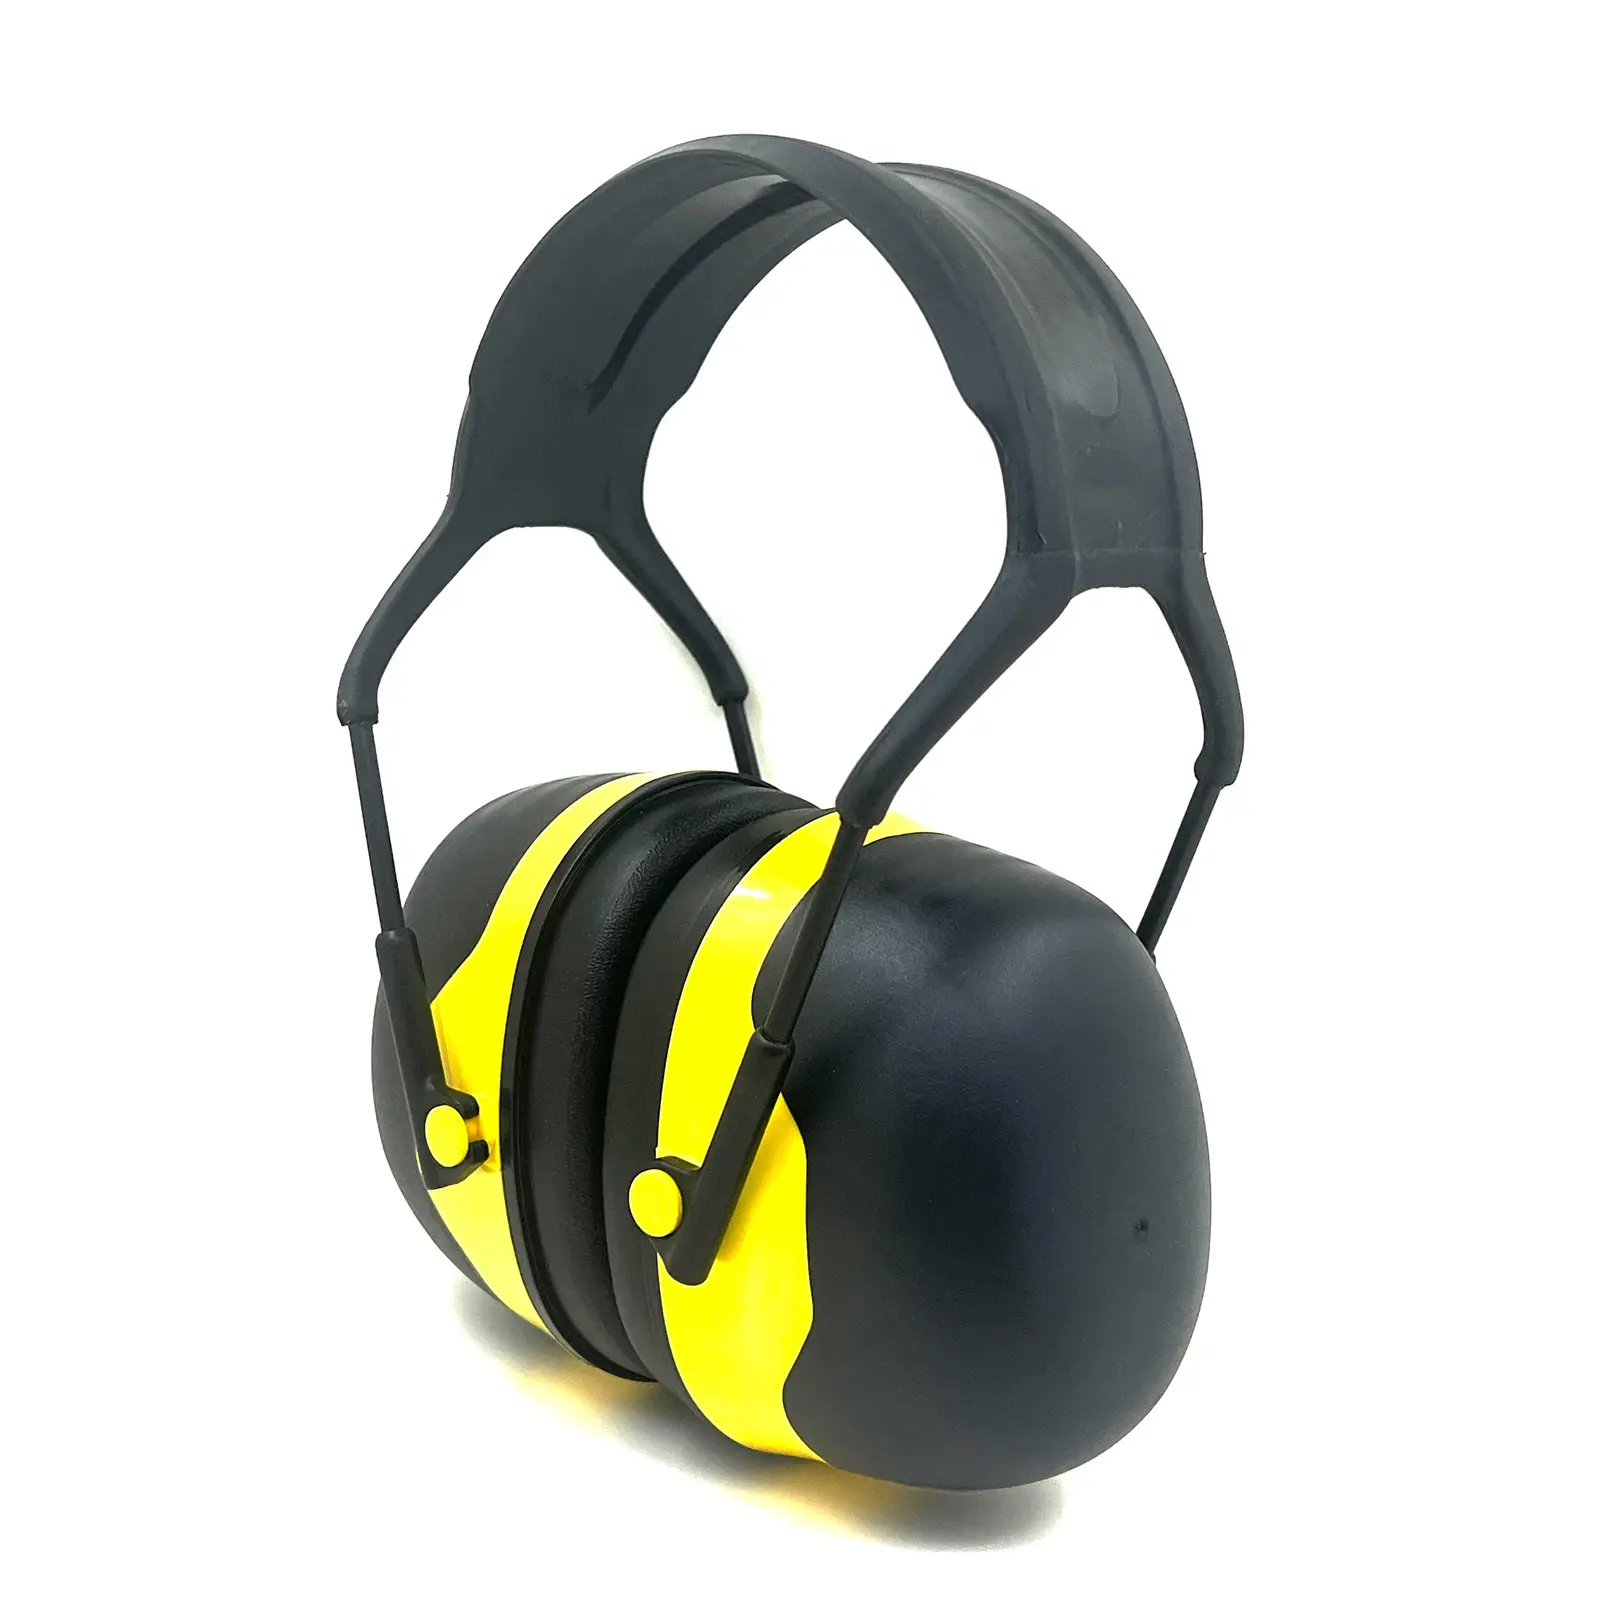 OEM GS13 Earmuffs 35dB Noise Reduction Safety Hearing Protection Personal Defense Equipment